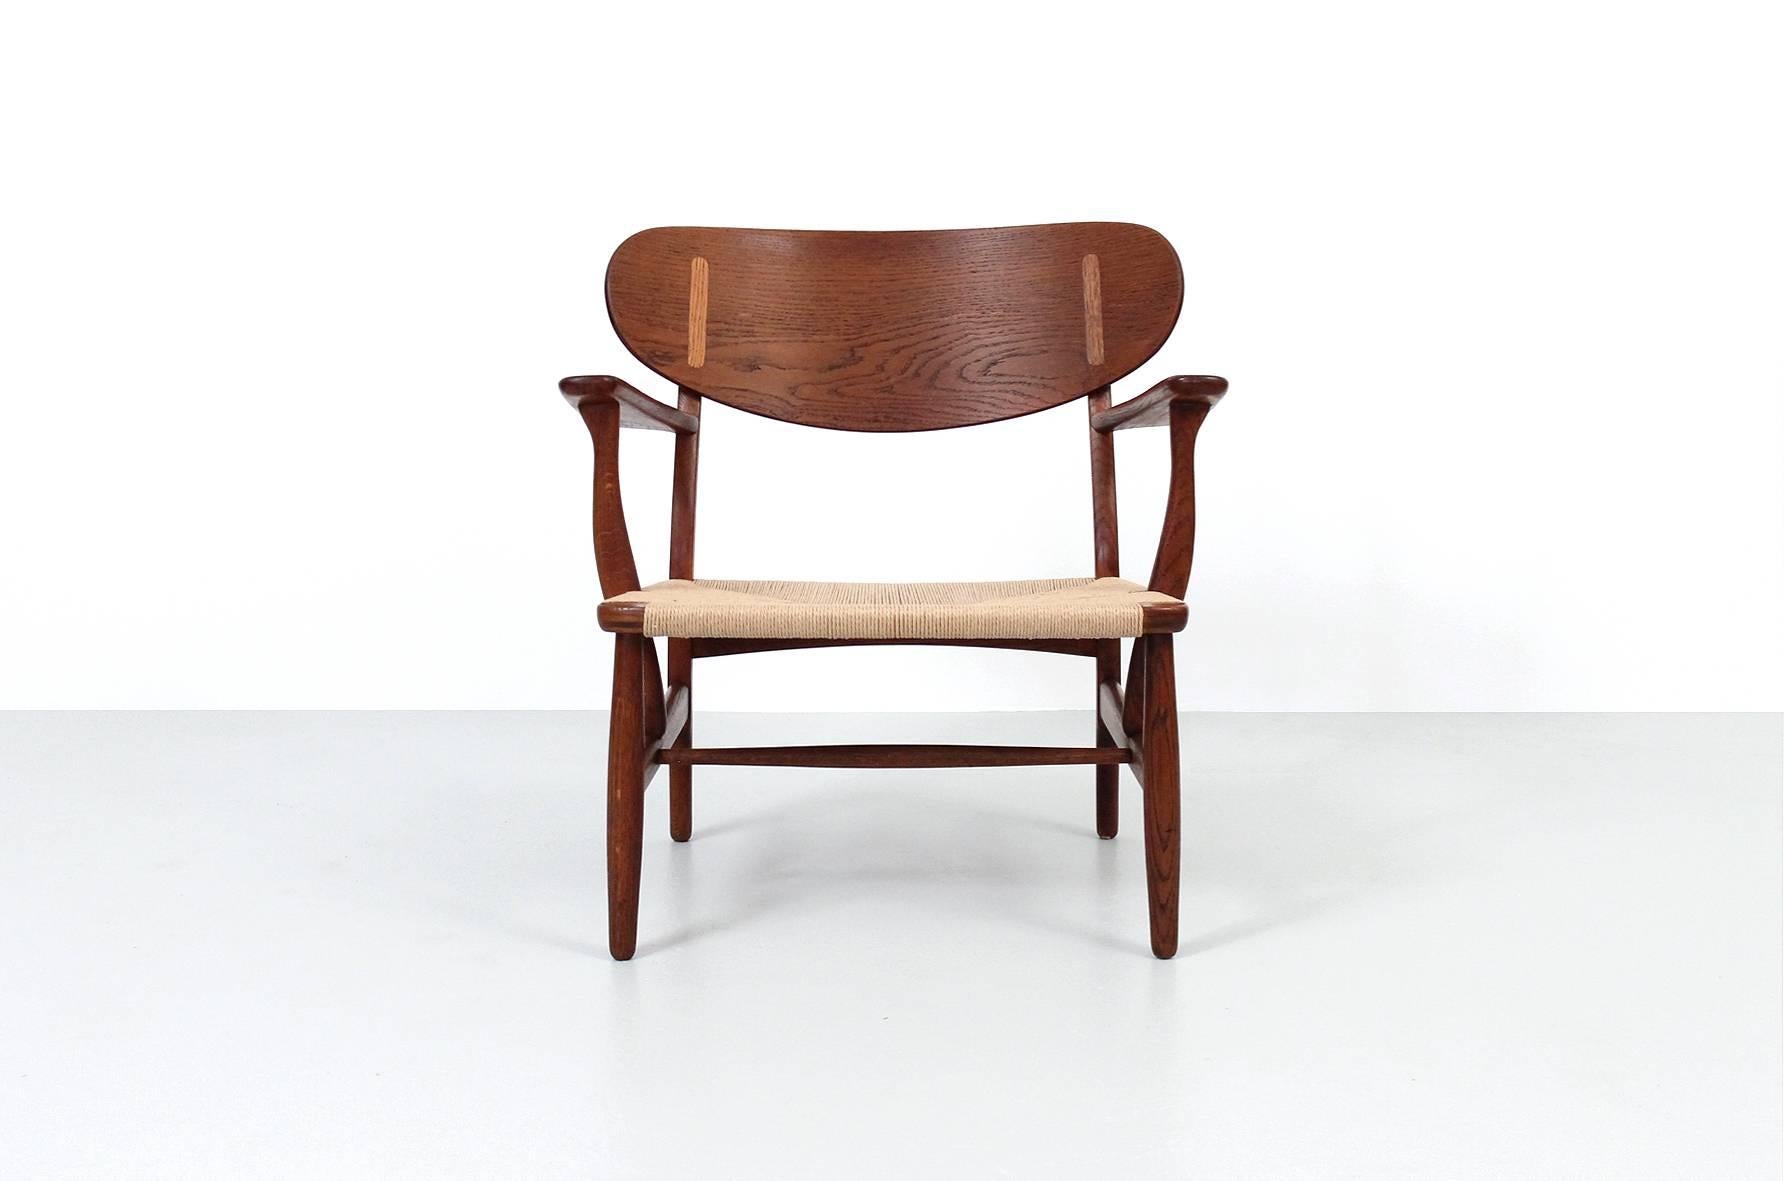 Early pair of CH22 lounge chairs by Hans Wegner for Carl Hansen & Søn. Handsome and sculptural chair design from 1951 executed in oak with woven papercord seats.